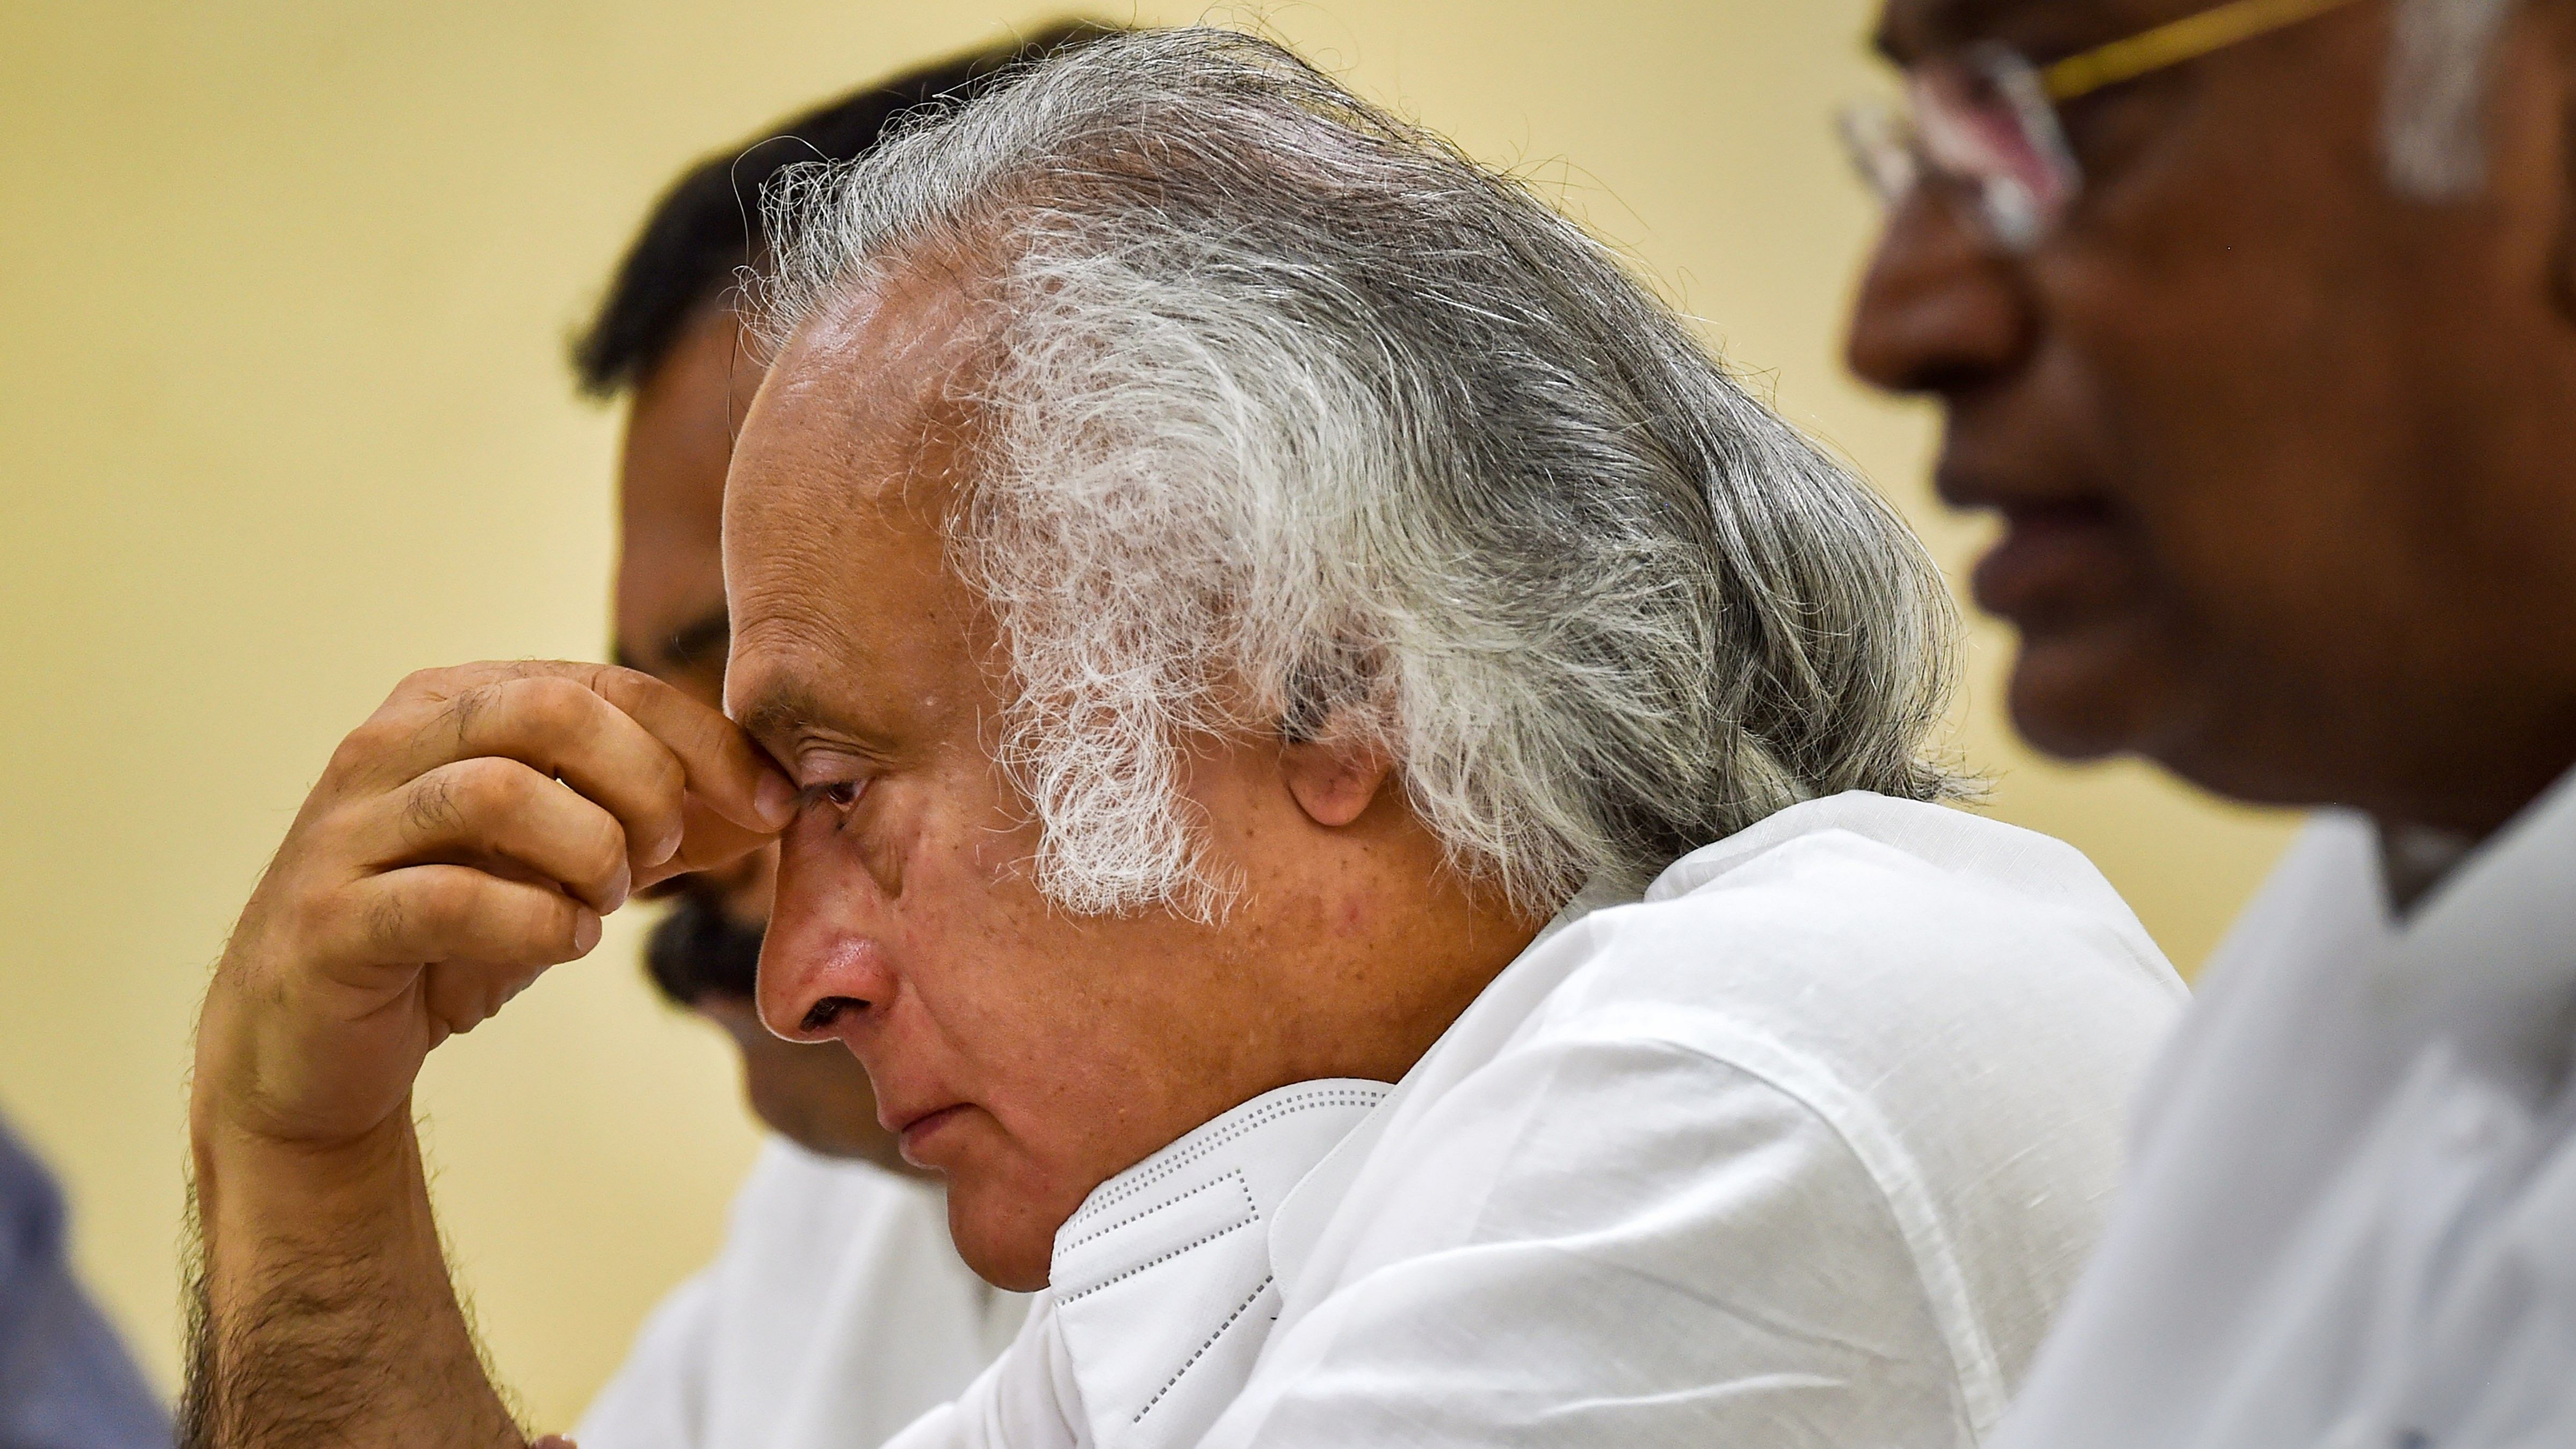 The accused who was arrested on Friday was found selling personal and confidential data of about 66.9 crore individuals and organisations maintained in 104 categories, Jairam Ramesh said